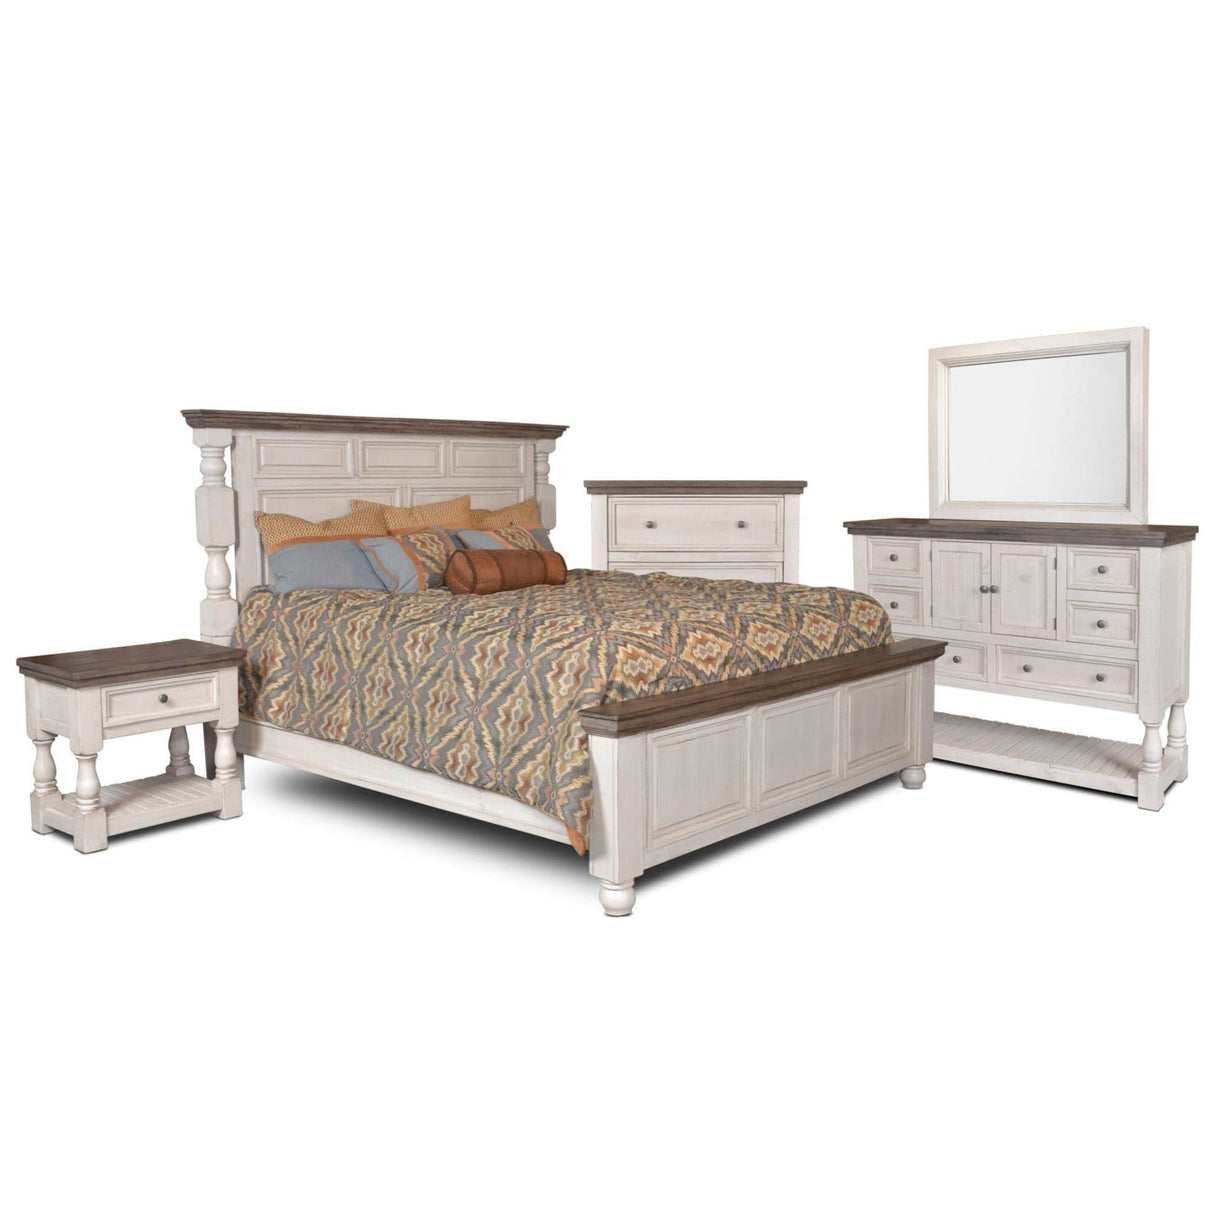 Sunset Trading Rustic French 5 Piece King Bedroom Set HH-4750-15-K5P - Bedroom Depot USA